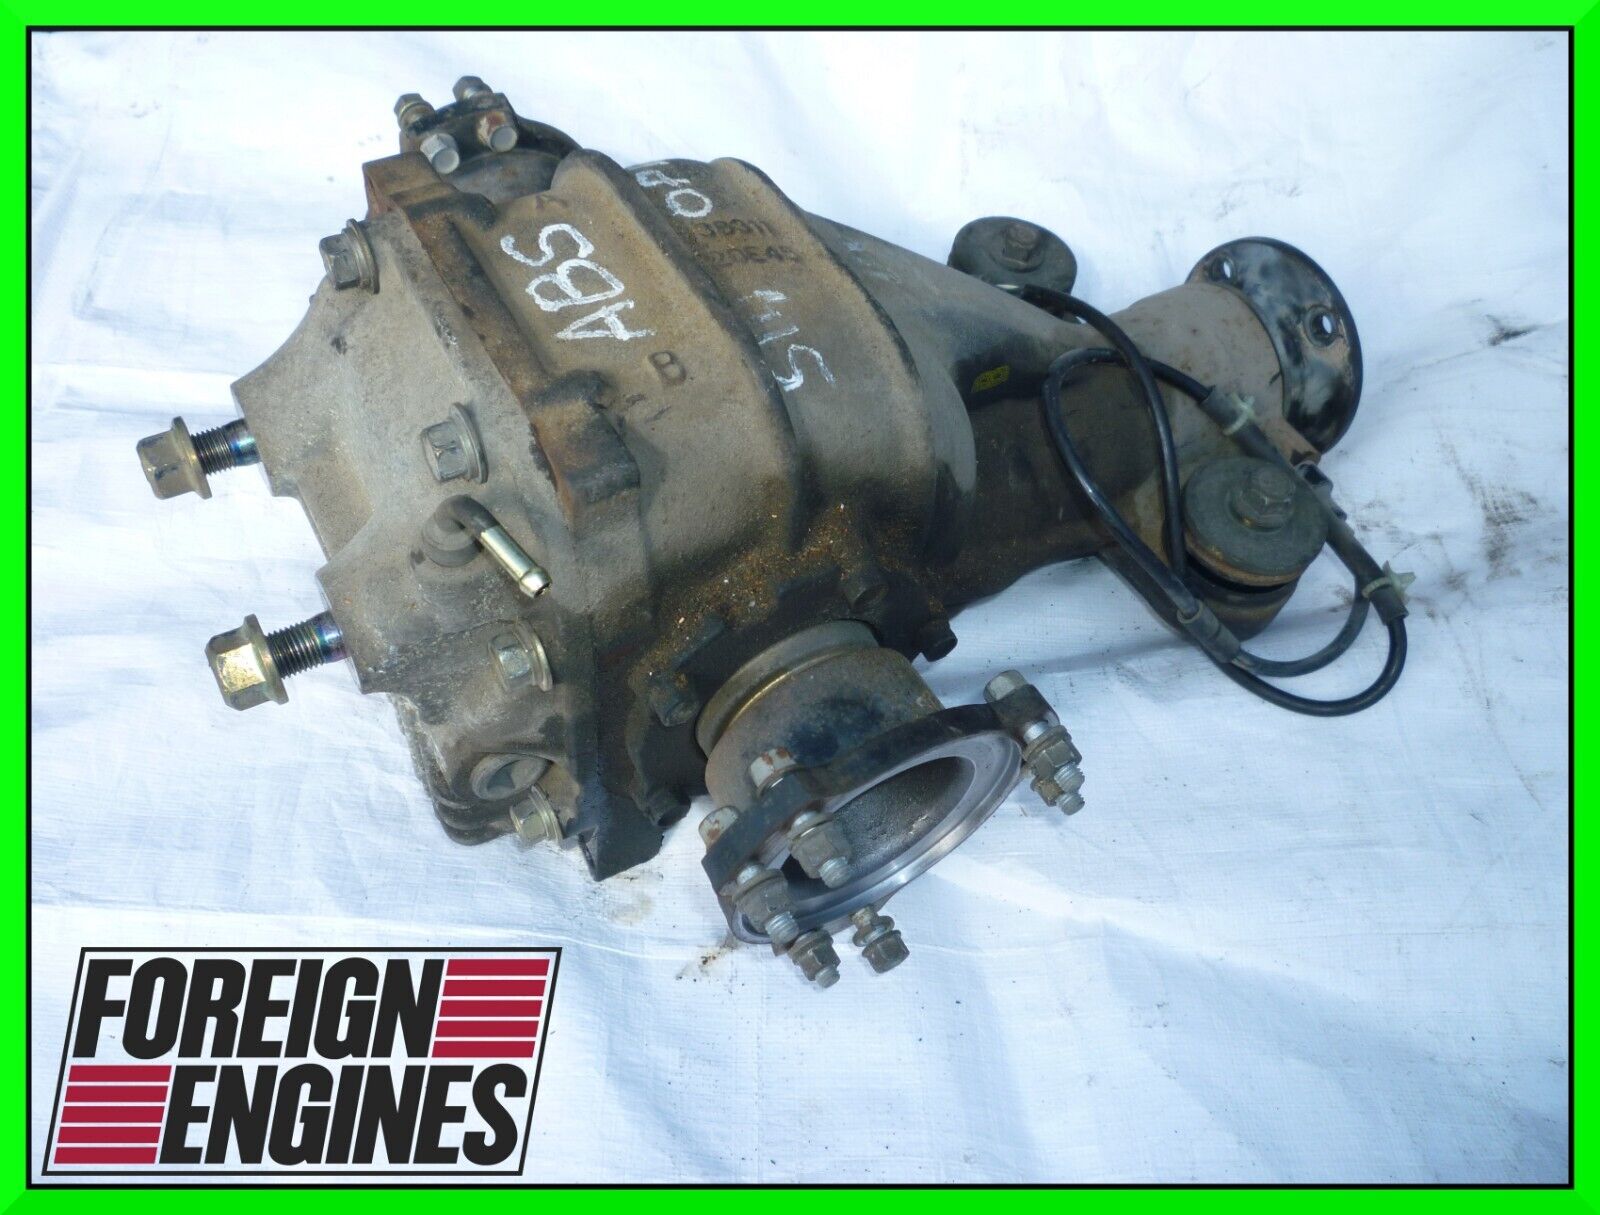 JDM NISSAN S14 SILVIA R200 4:08 OPEN ABS REAR DIFFERENTIAL DIFF 240SX